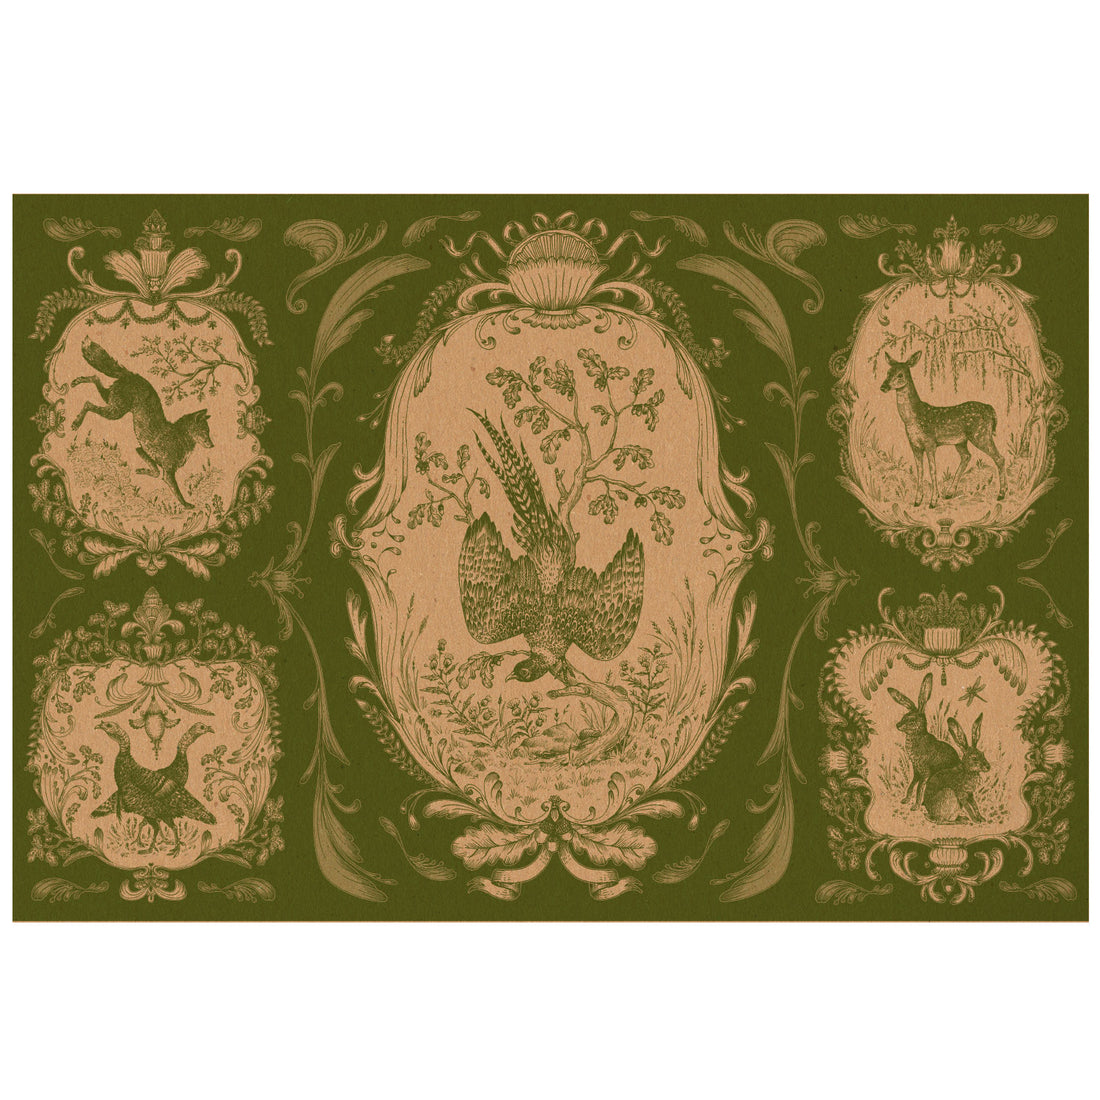 A toile-style illustration featuring detailed filigree around five vignettes containing a fox, two wild turkeys, a deer, two rabbits, and a large pheasant in the middle, all in monochrome green printed on tan kraft paper.